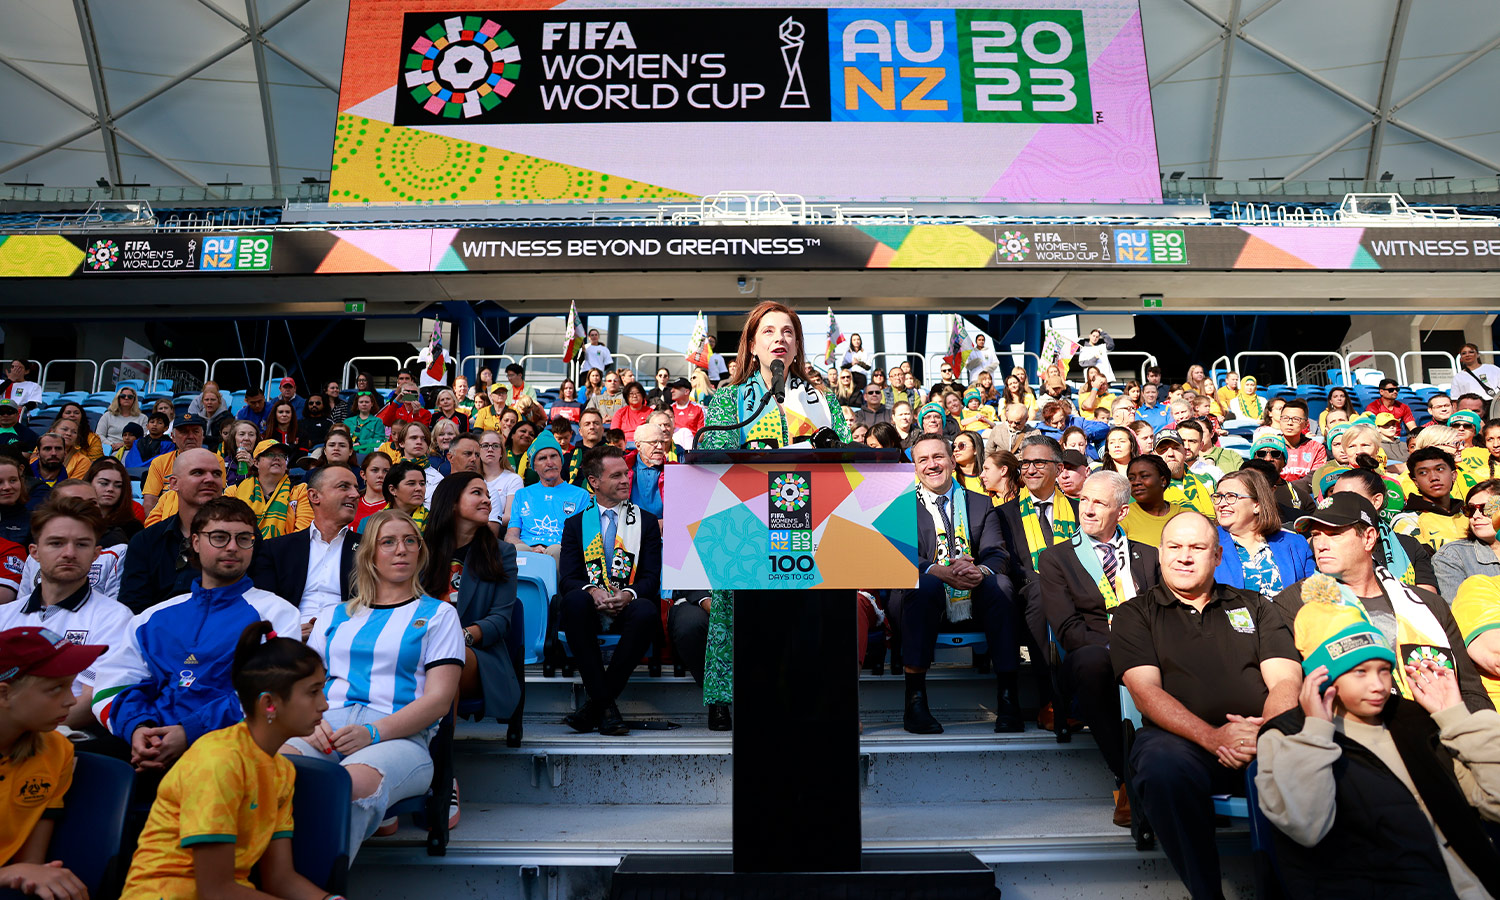 Minister for Sport Anika Wells speaks during the FIFA Women's World Cup 100 Days To Go launch event at Sydney Football Stadium